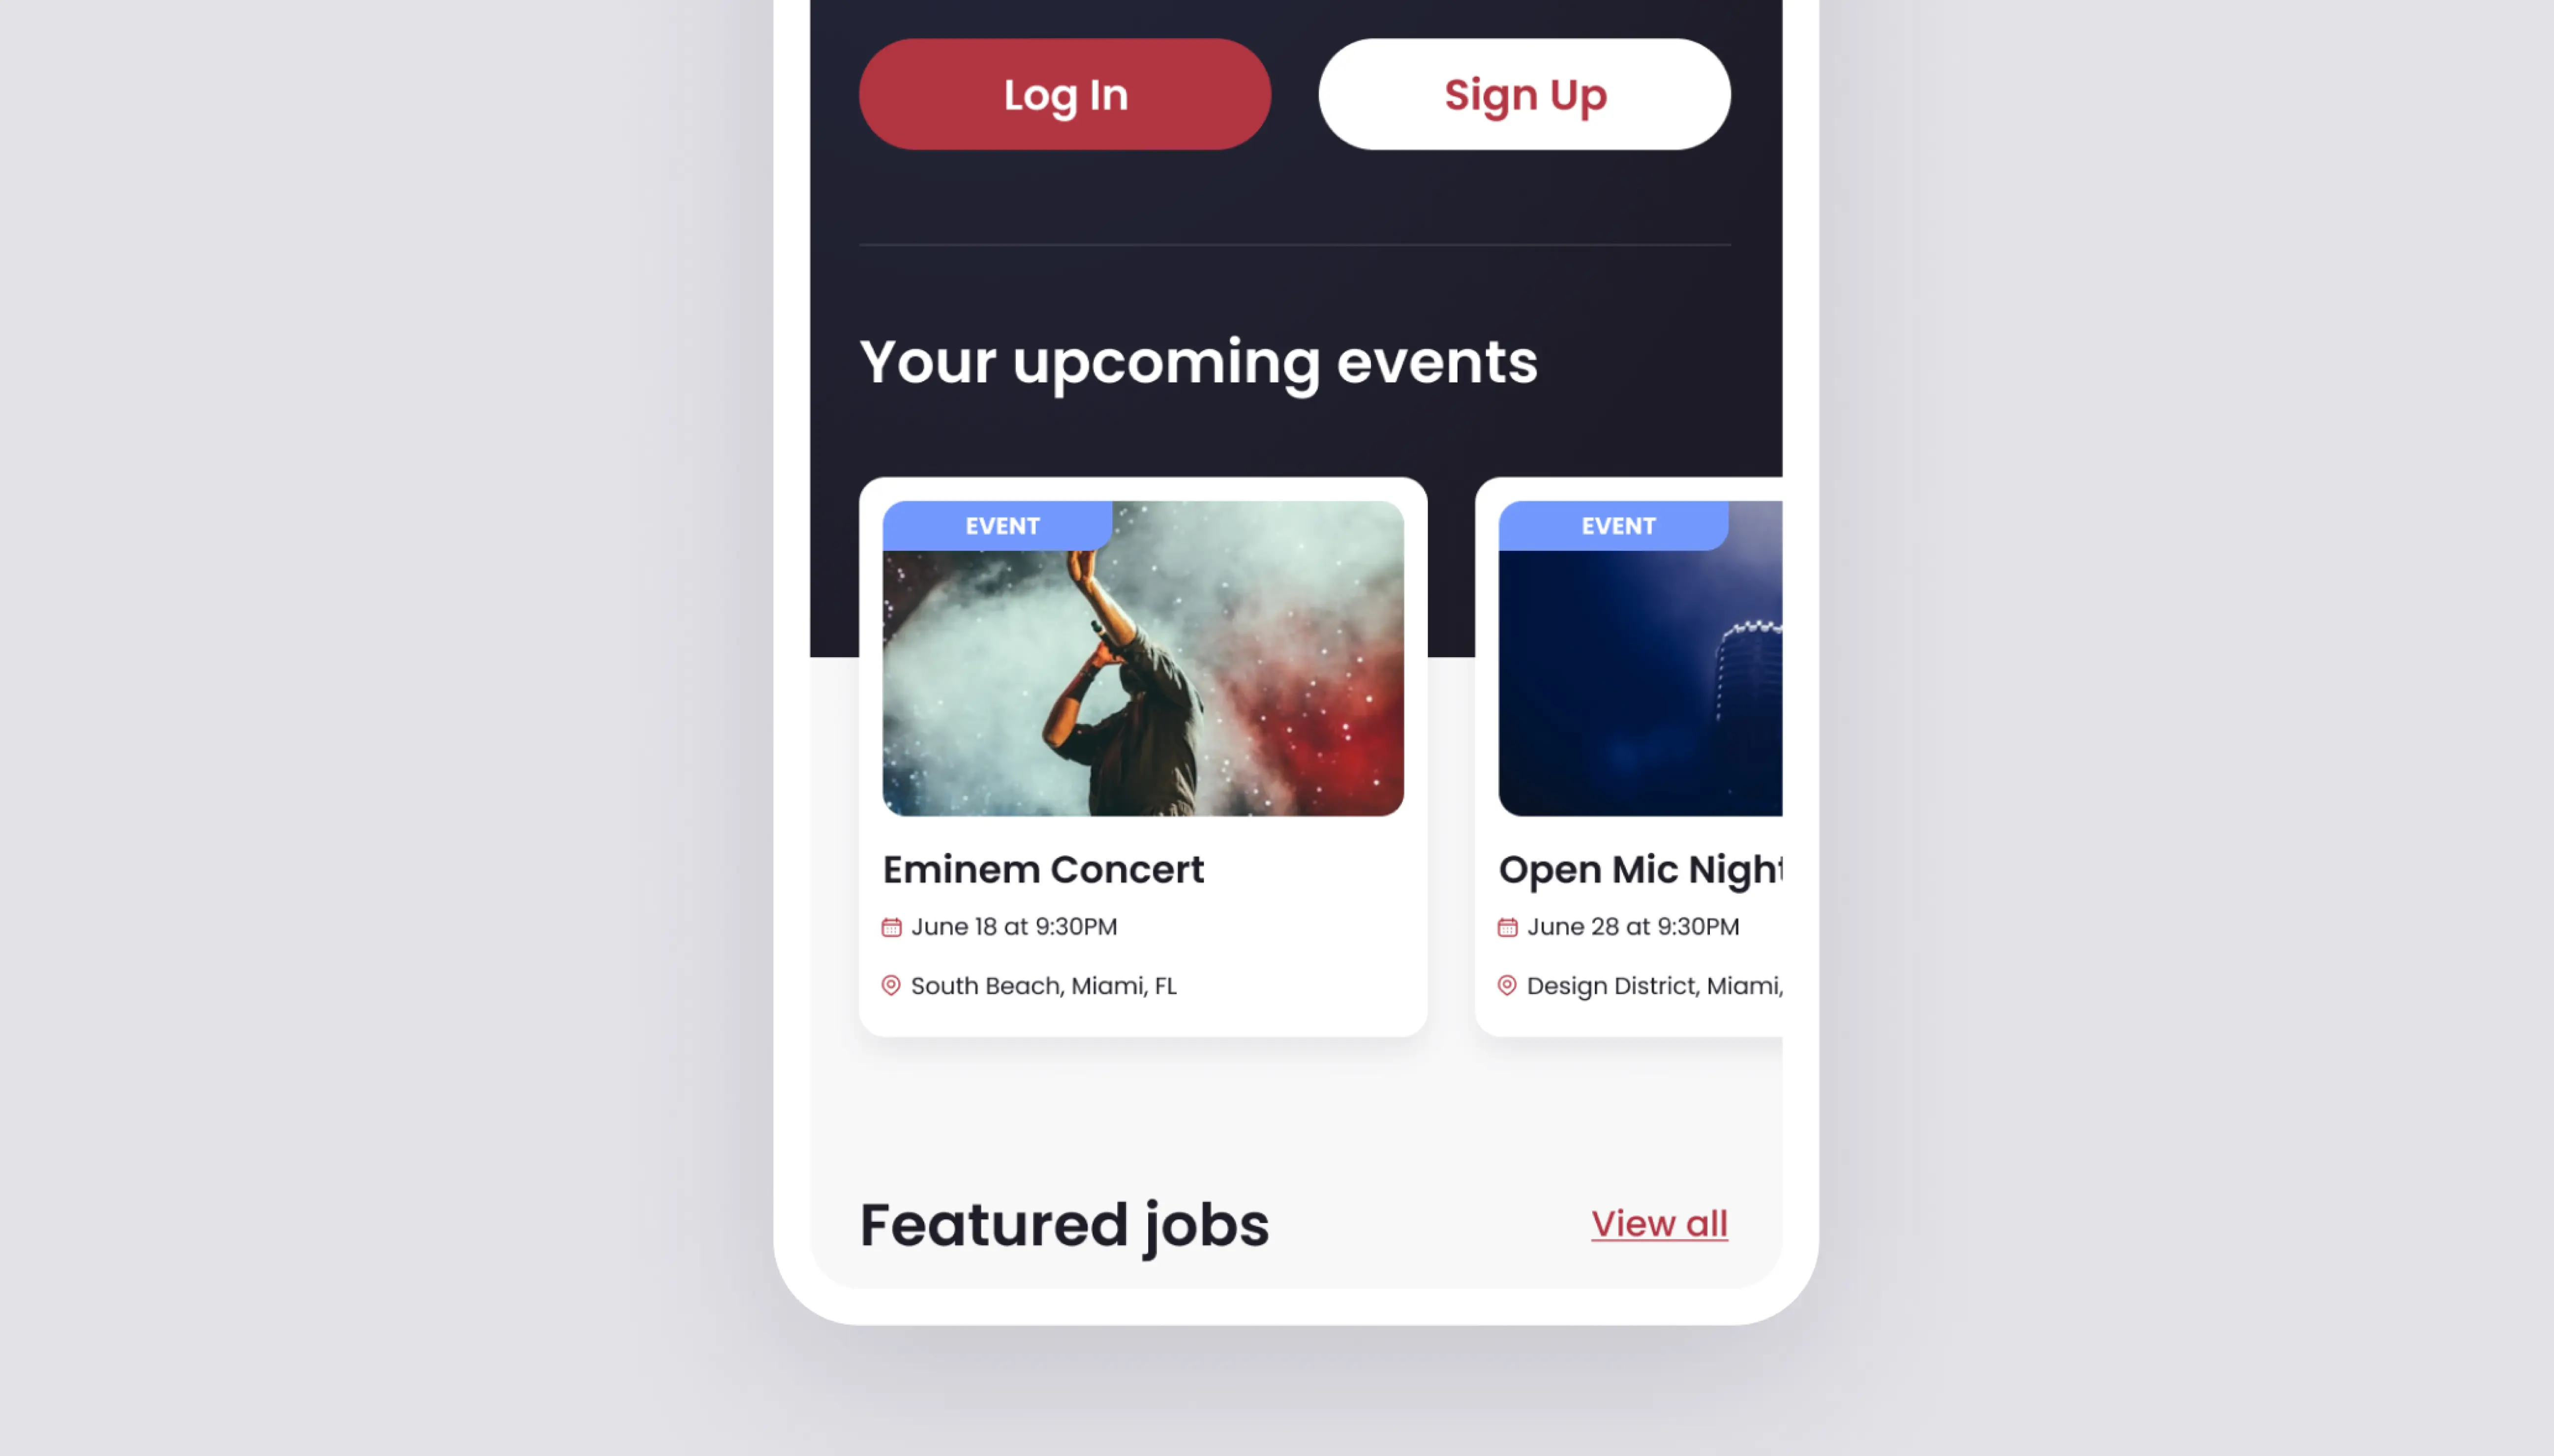 PopOver events upcoming events ui snapshots